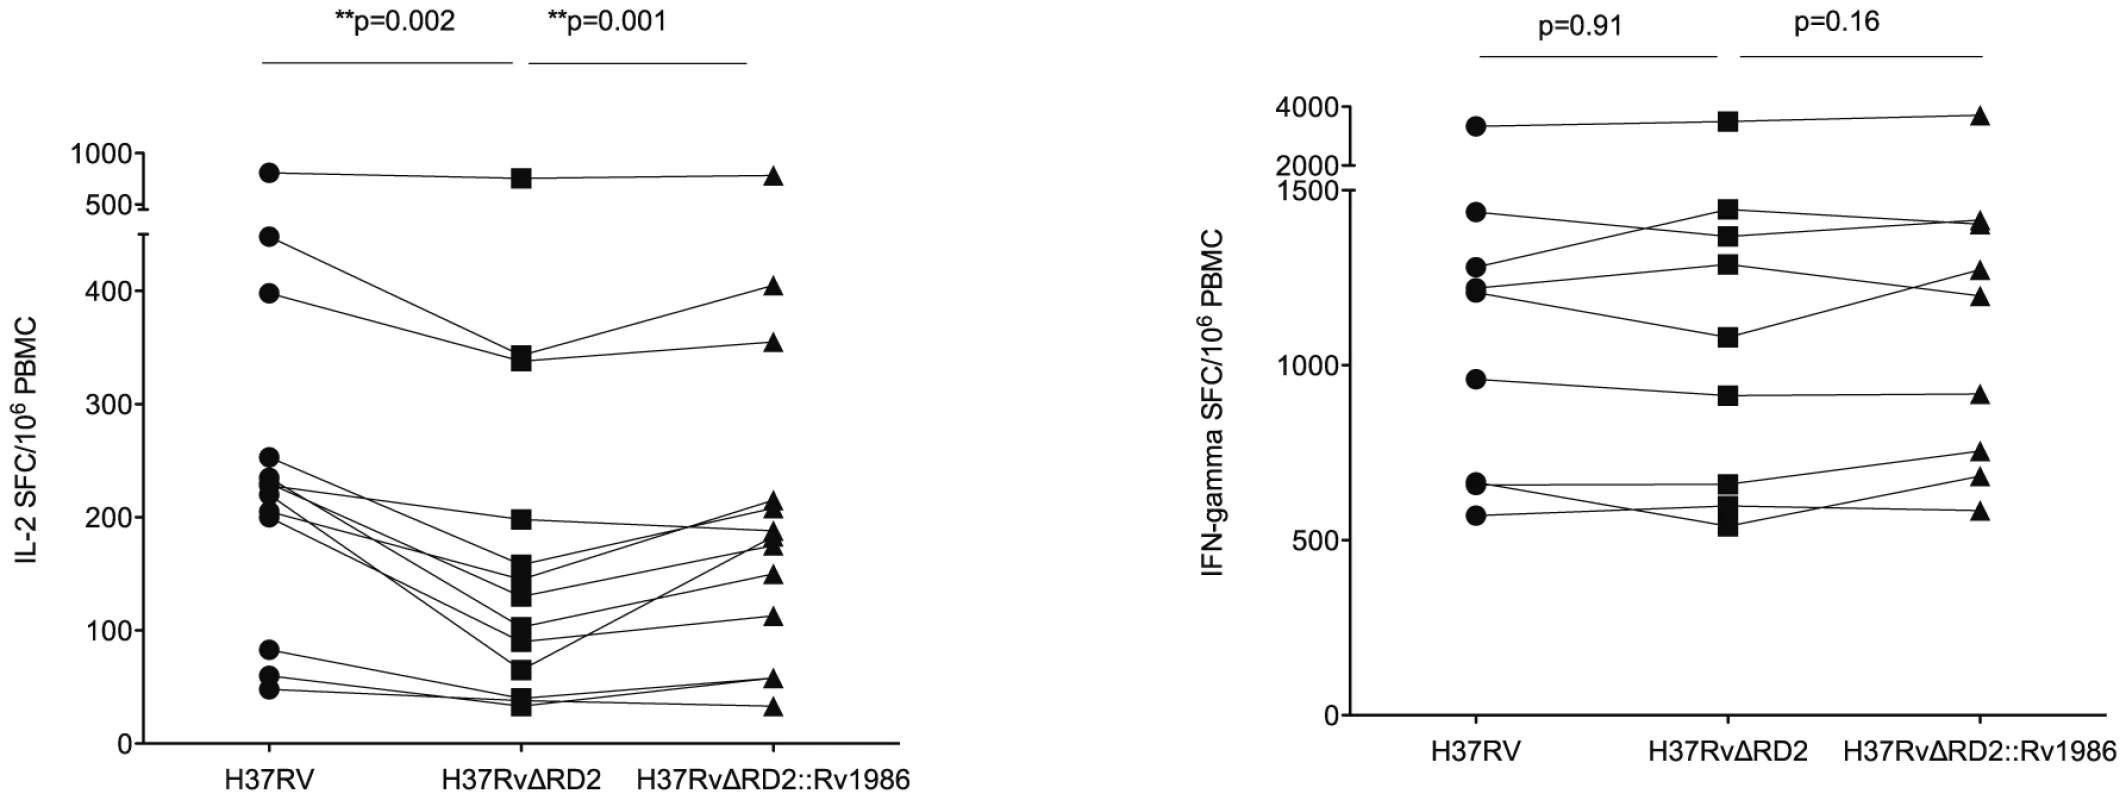 Live recognition of M. tuberculosis H37Rv, H37RvΔRD2 and H37RvΔRD2::Rv1986.